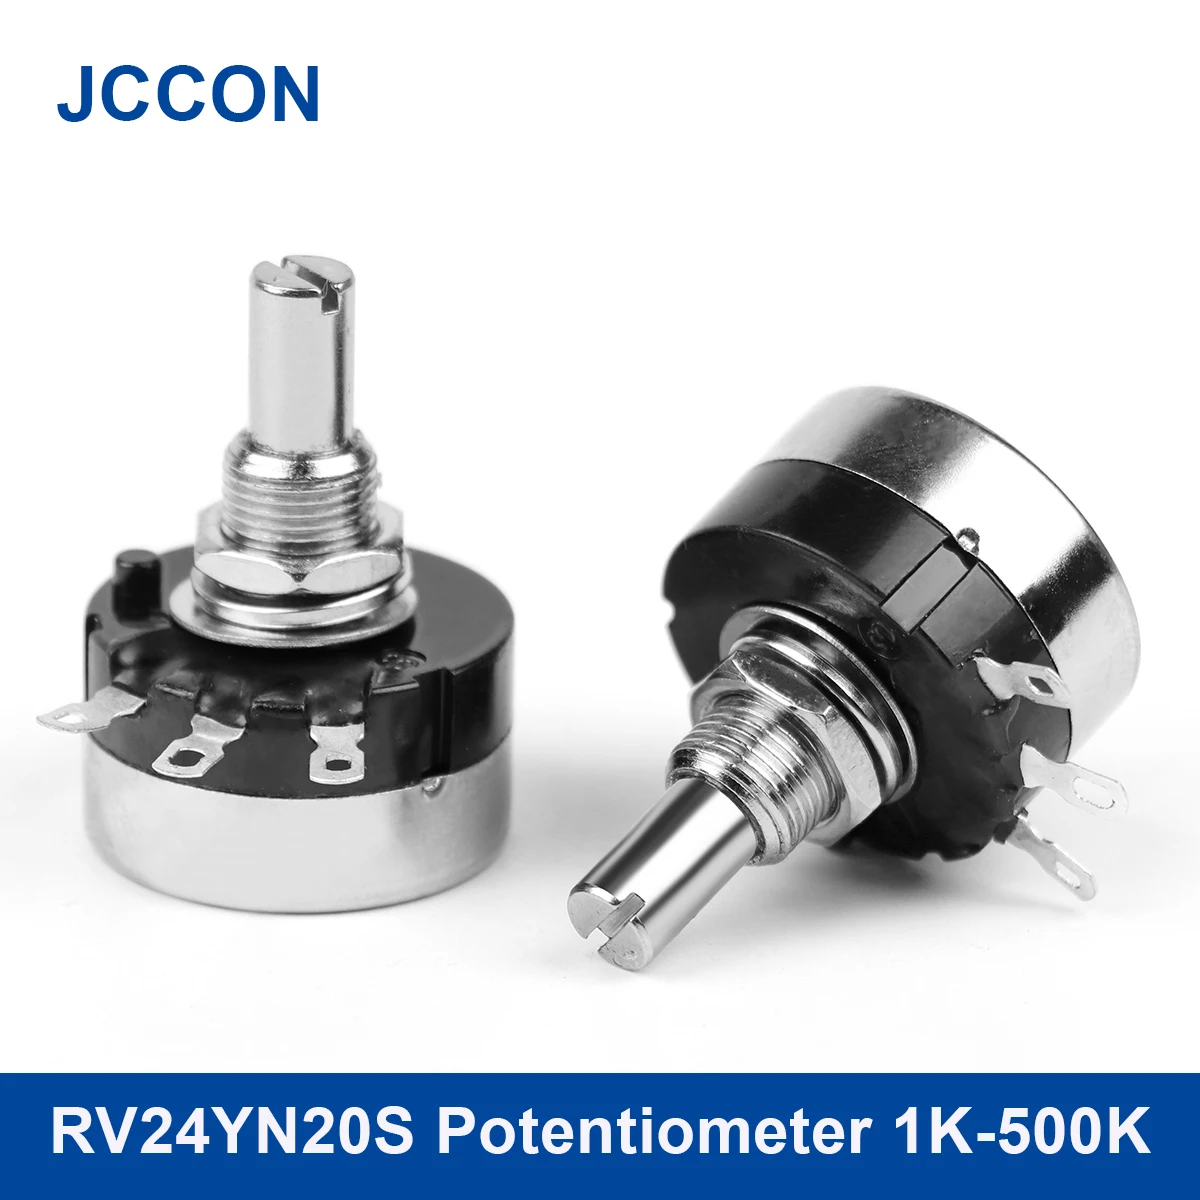 1Pcs RV24YN20S Potentiometer 1K 2K 20K 50K 100K 200K 500K Single-turn Carbon Film Potentiometer Vertical Rotary Switches 1pcs 7276 precision multi turn plastic shaft potentiometer ccw cw s 7276 r1k 2k 5k 10k 20k 50k 100k l2 5 new in stock